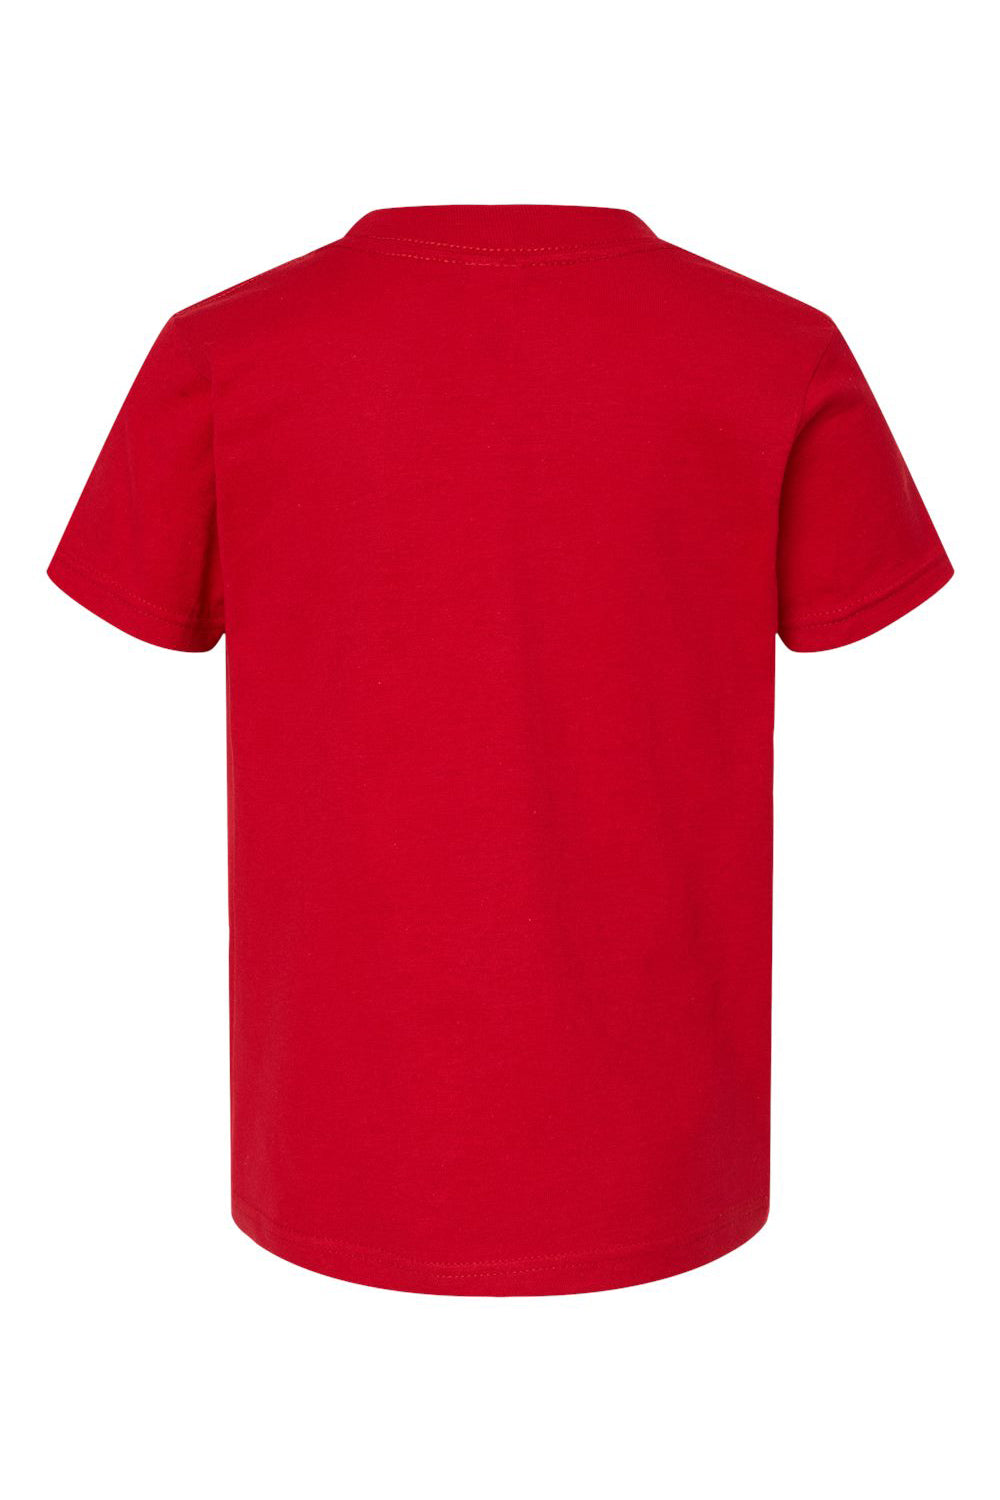 Tultex 235 Youth Fine Jersey Short Sleeve Crewneck T-Shirt Red Flat Back